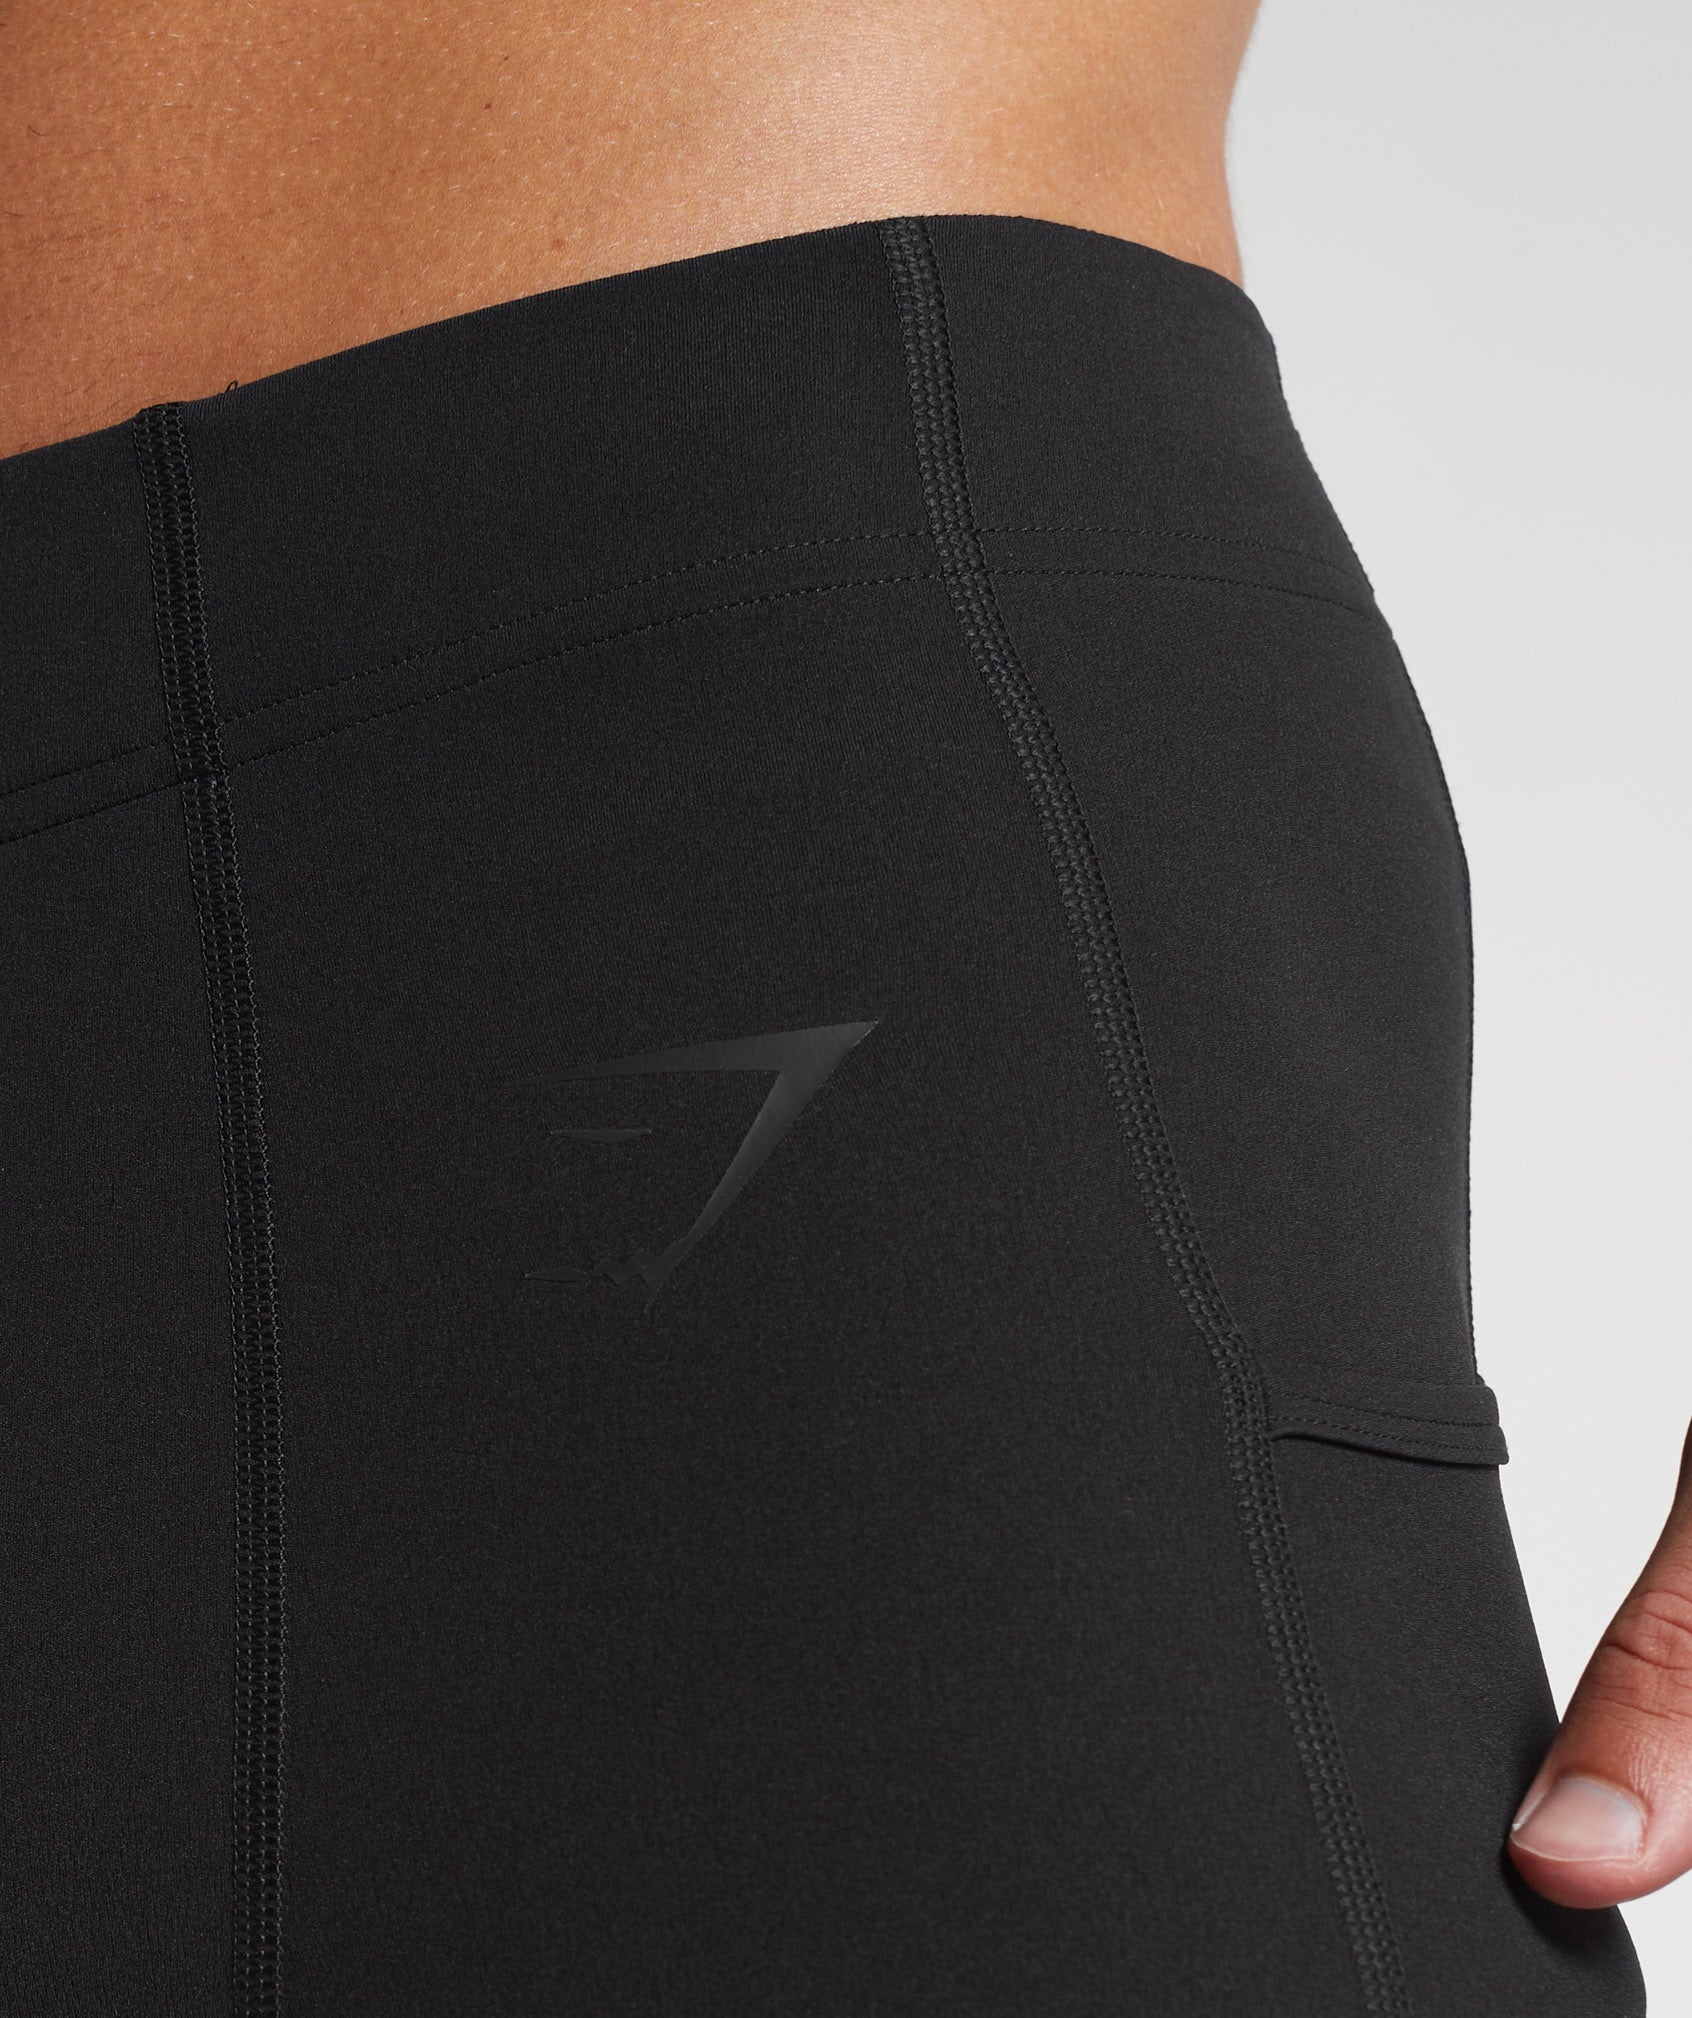 If anyone is looking for men's leggings, these Gymshark 315s are